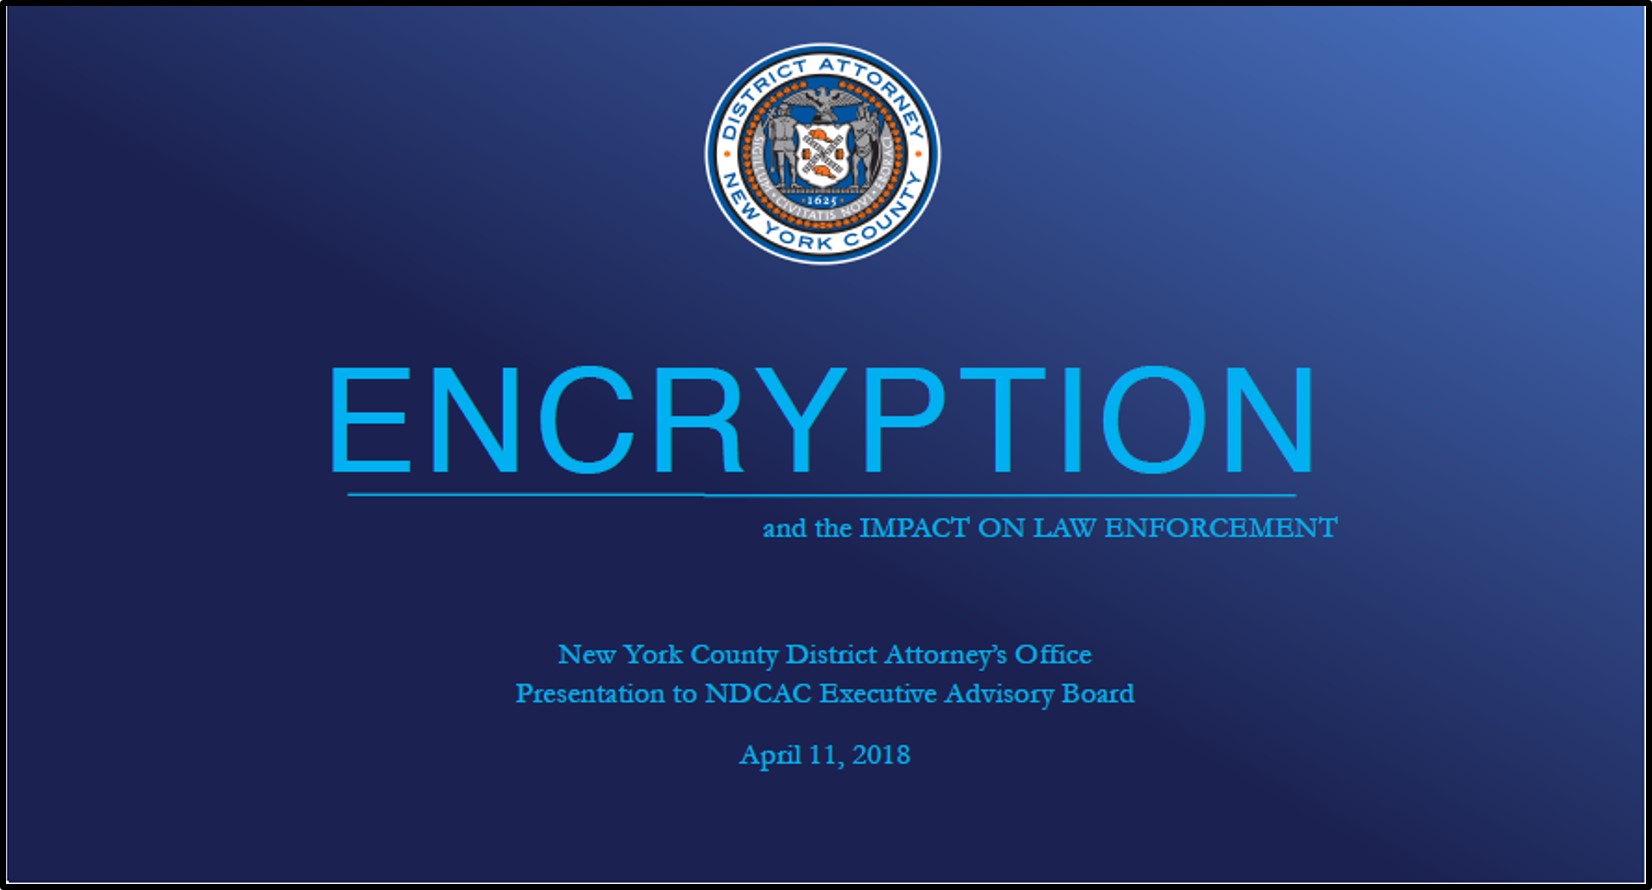 Encryption and Impact on Law Enforcement Title Slide